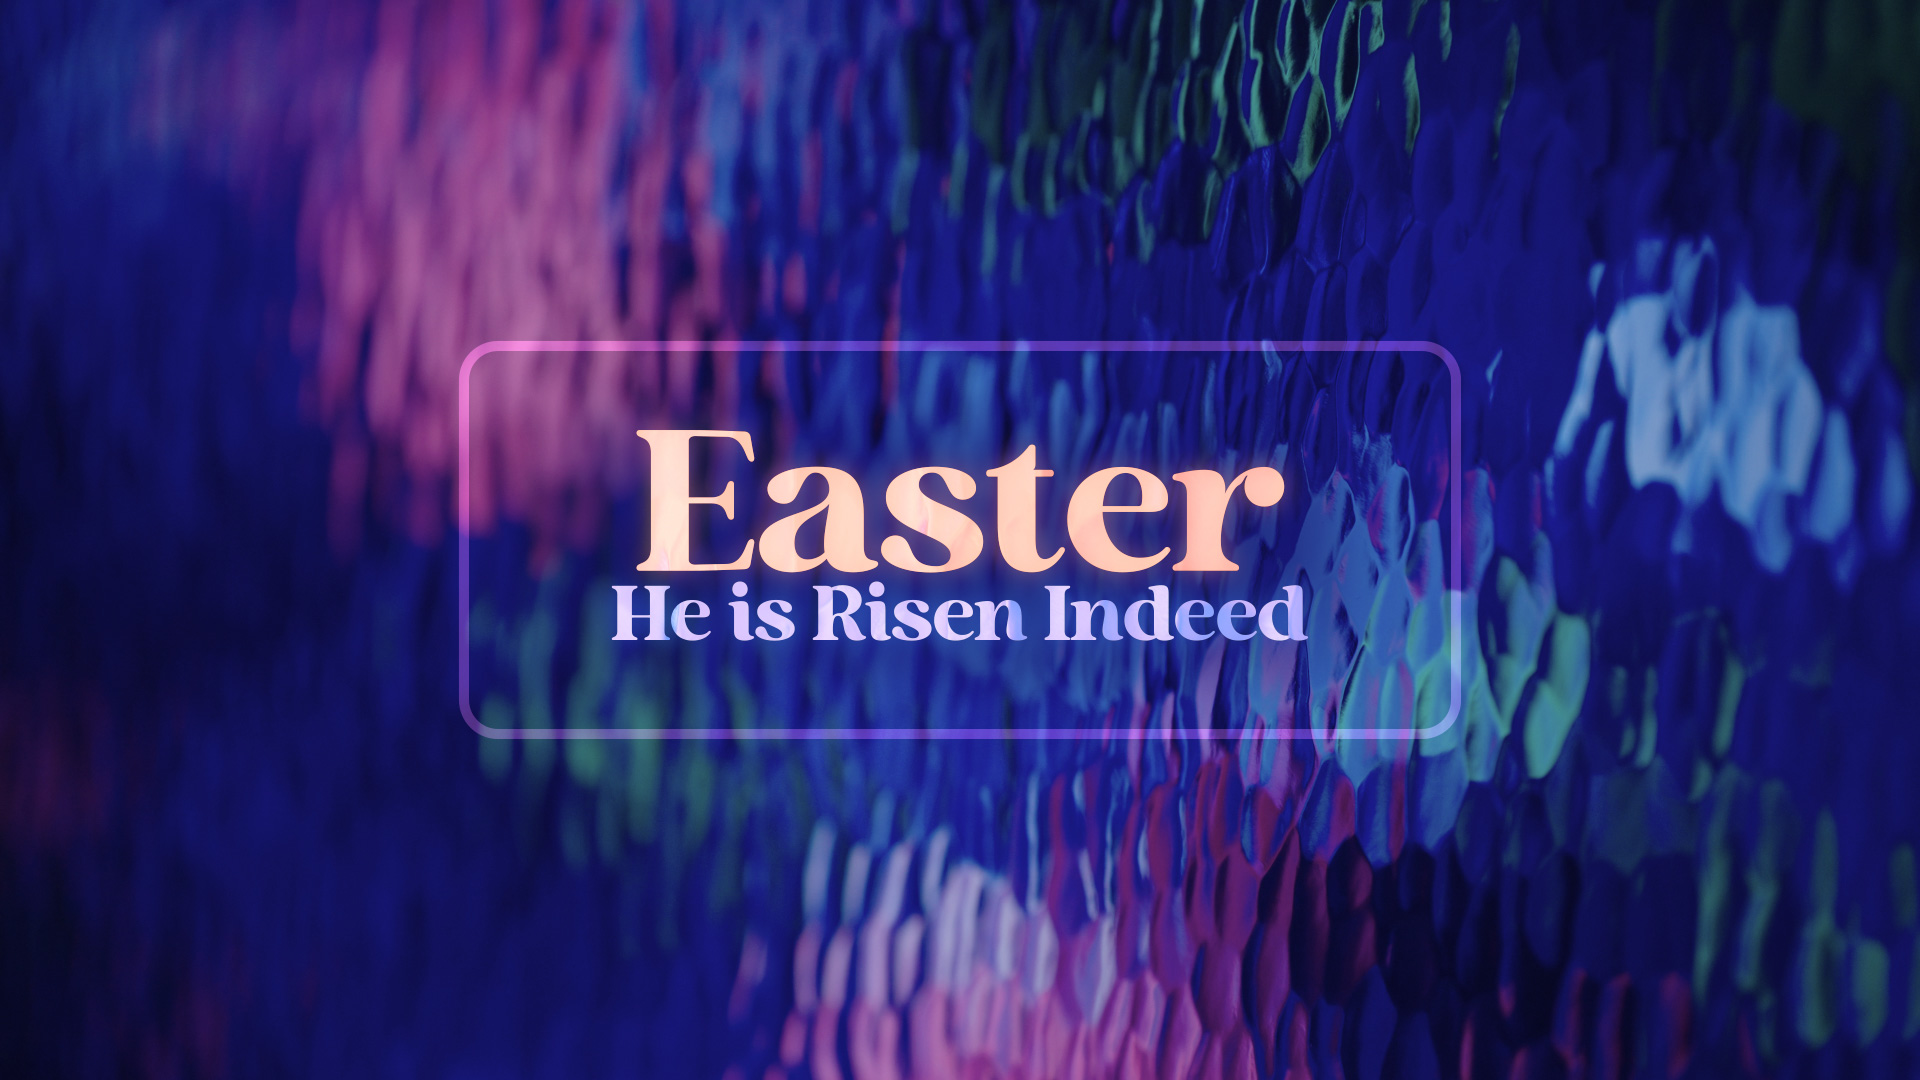 St. Andrew's UMC 9am Easter Worship Service